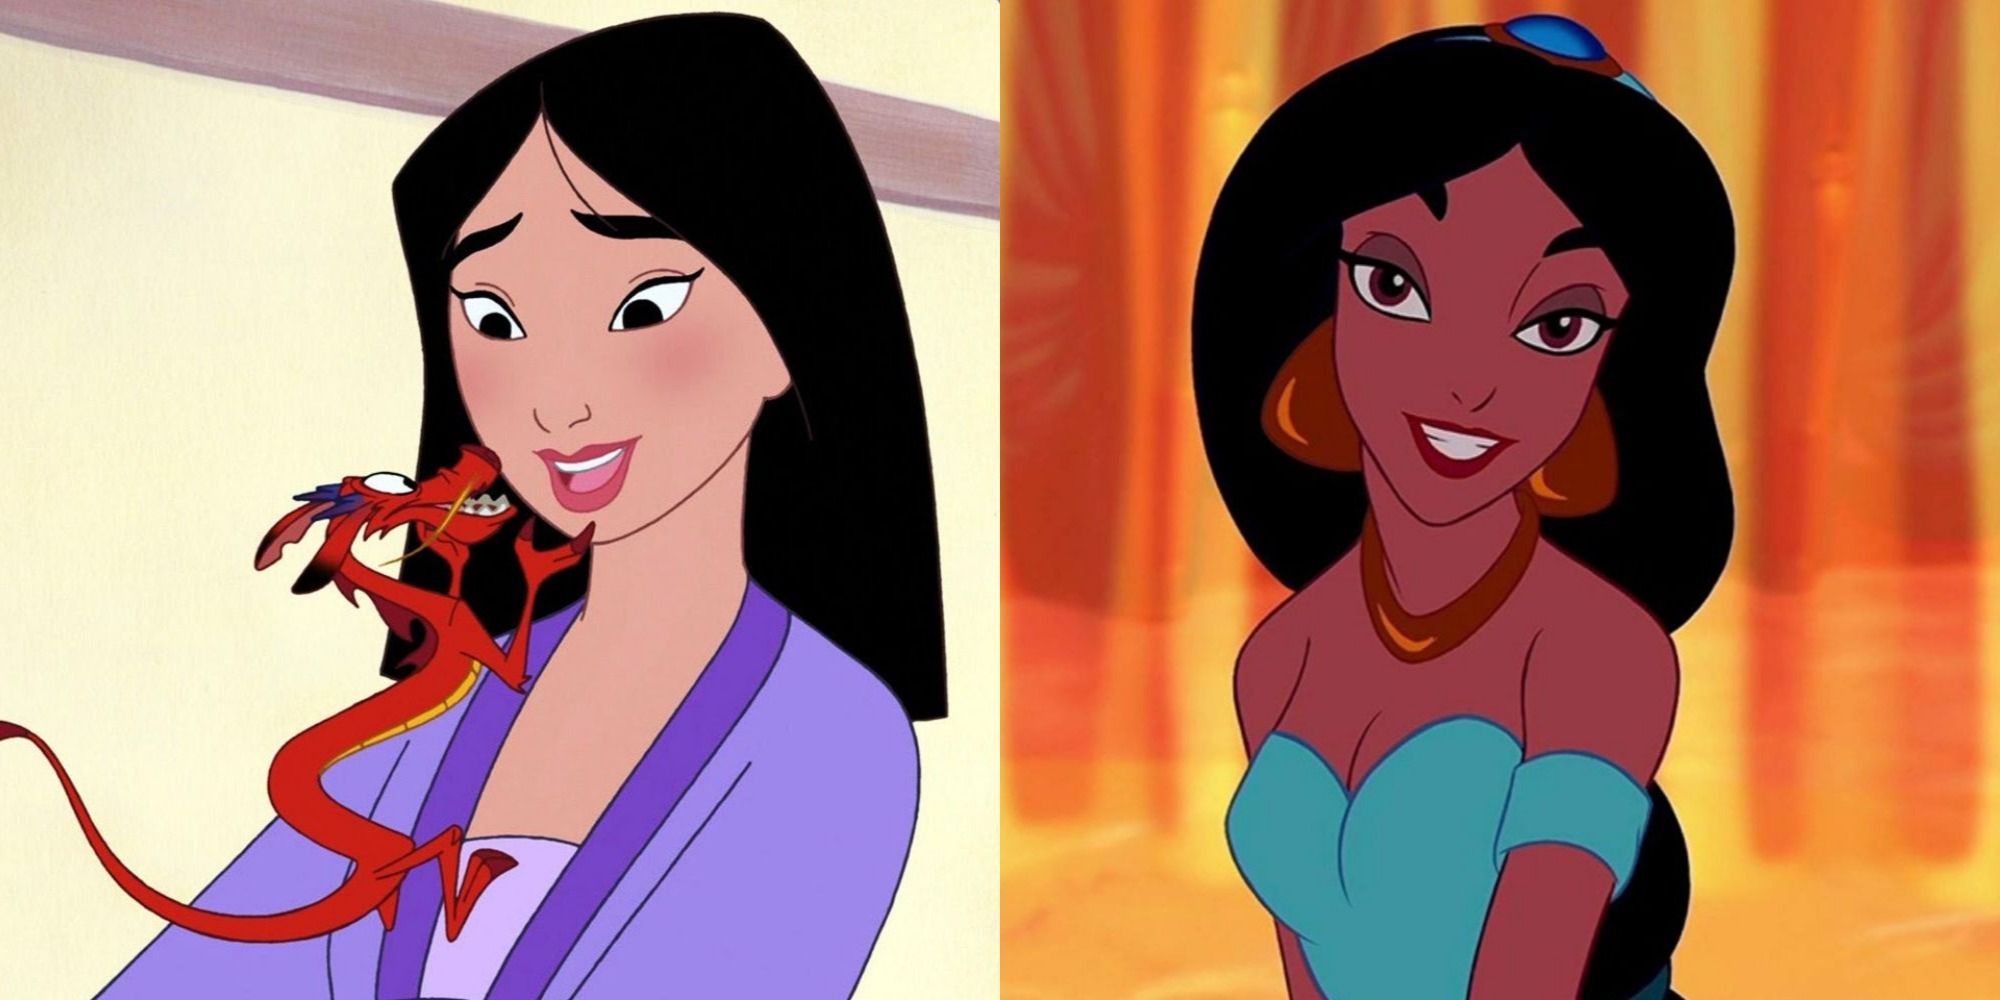 Disney Movie Classics: What Your Favorite Princess Says About You